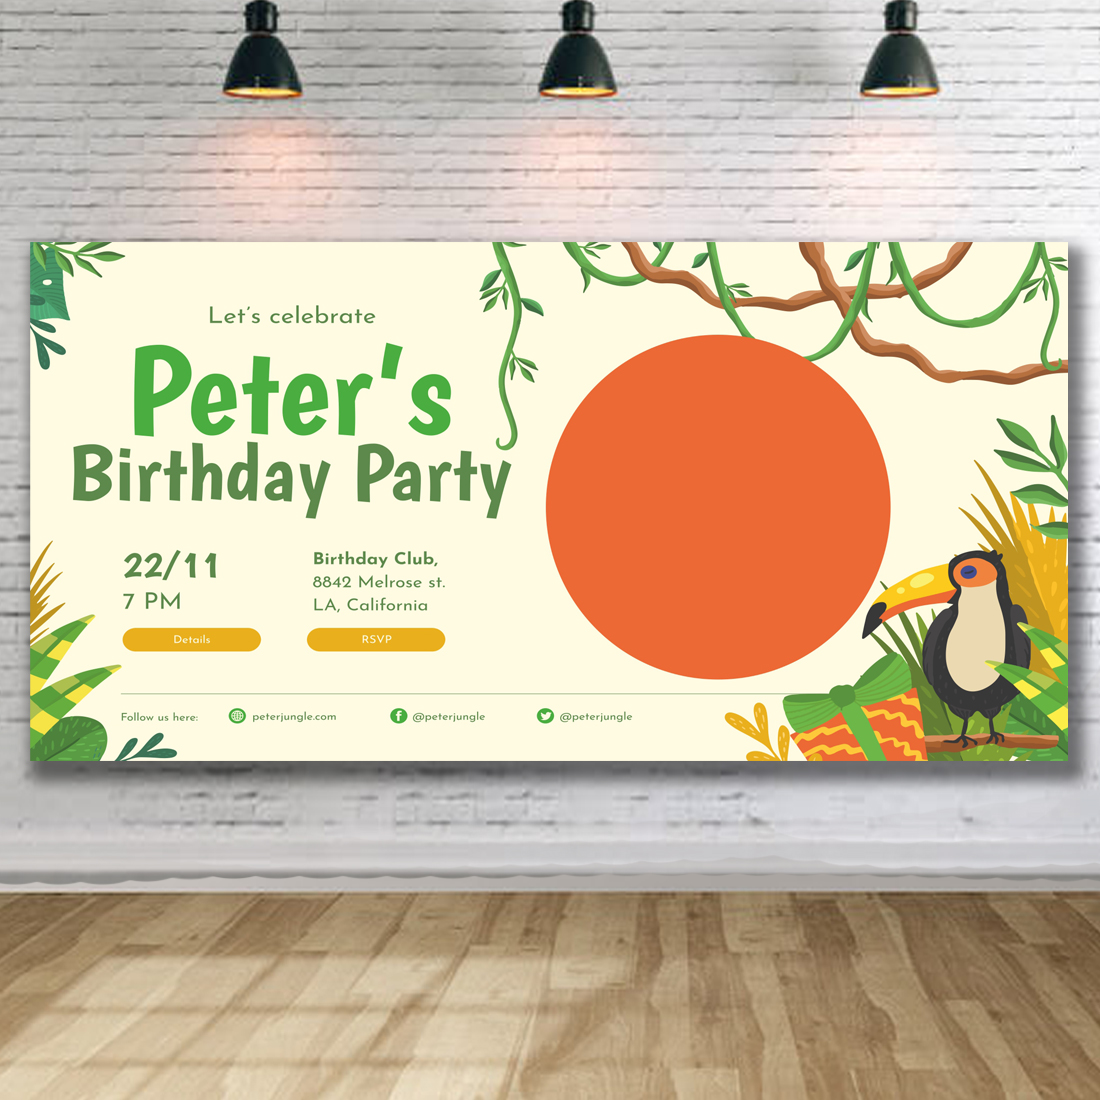 Birthday party poster hanging on a brick wall.